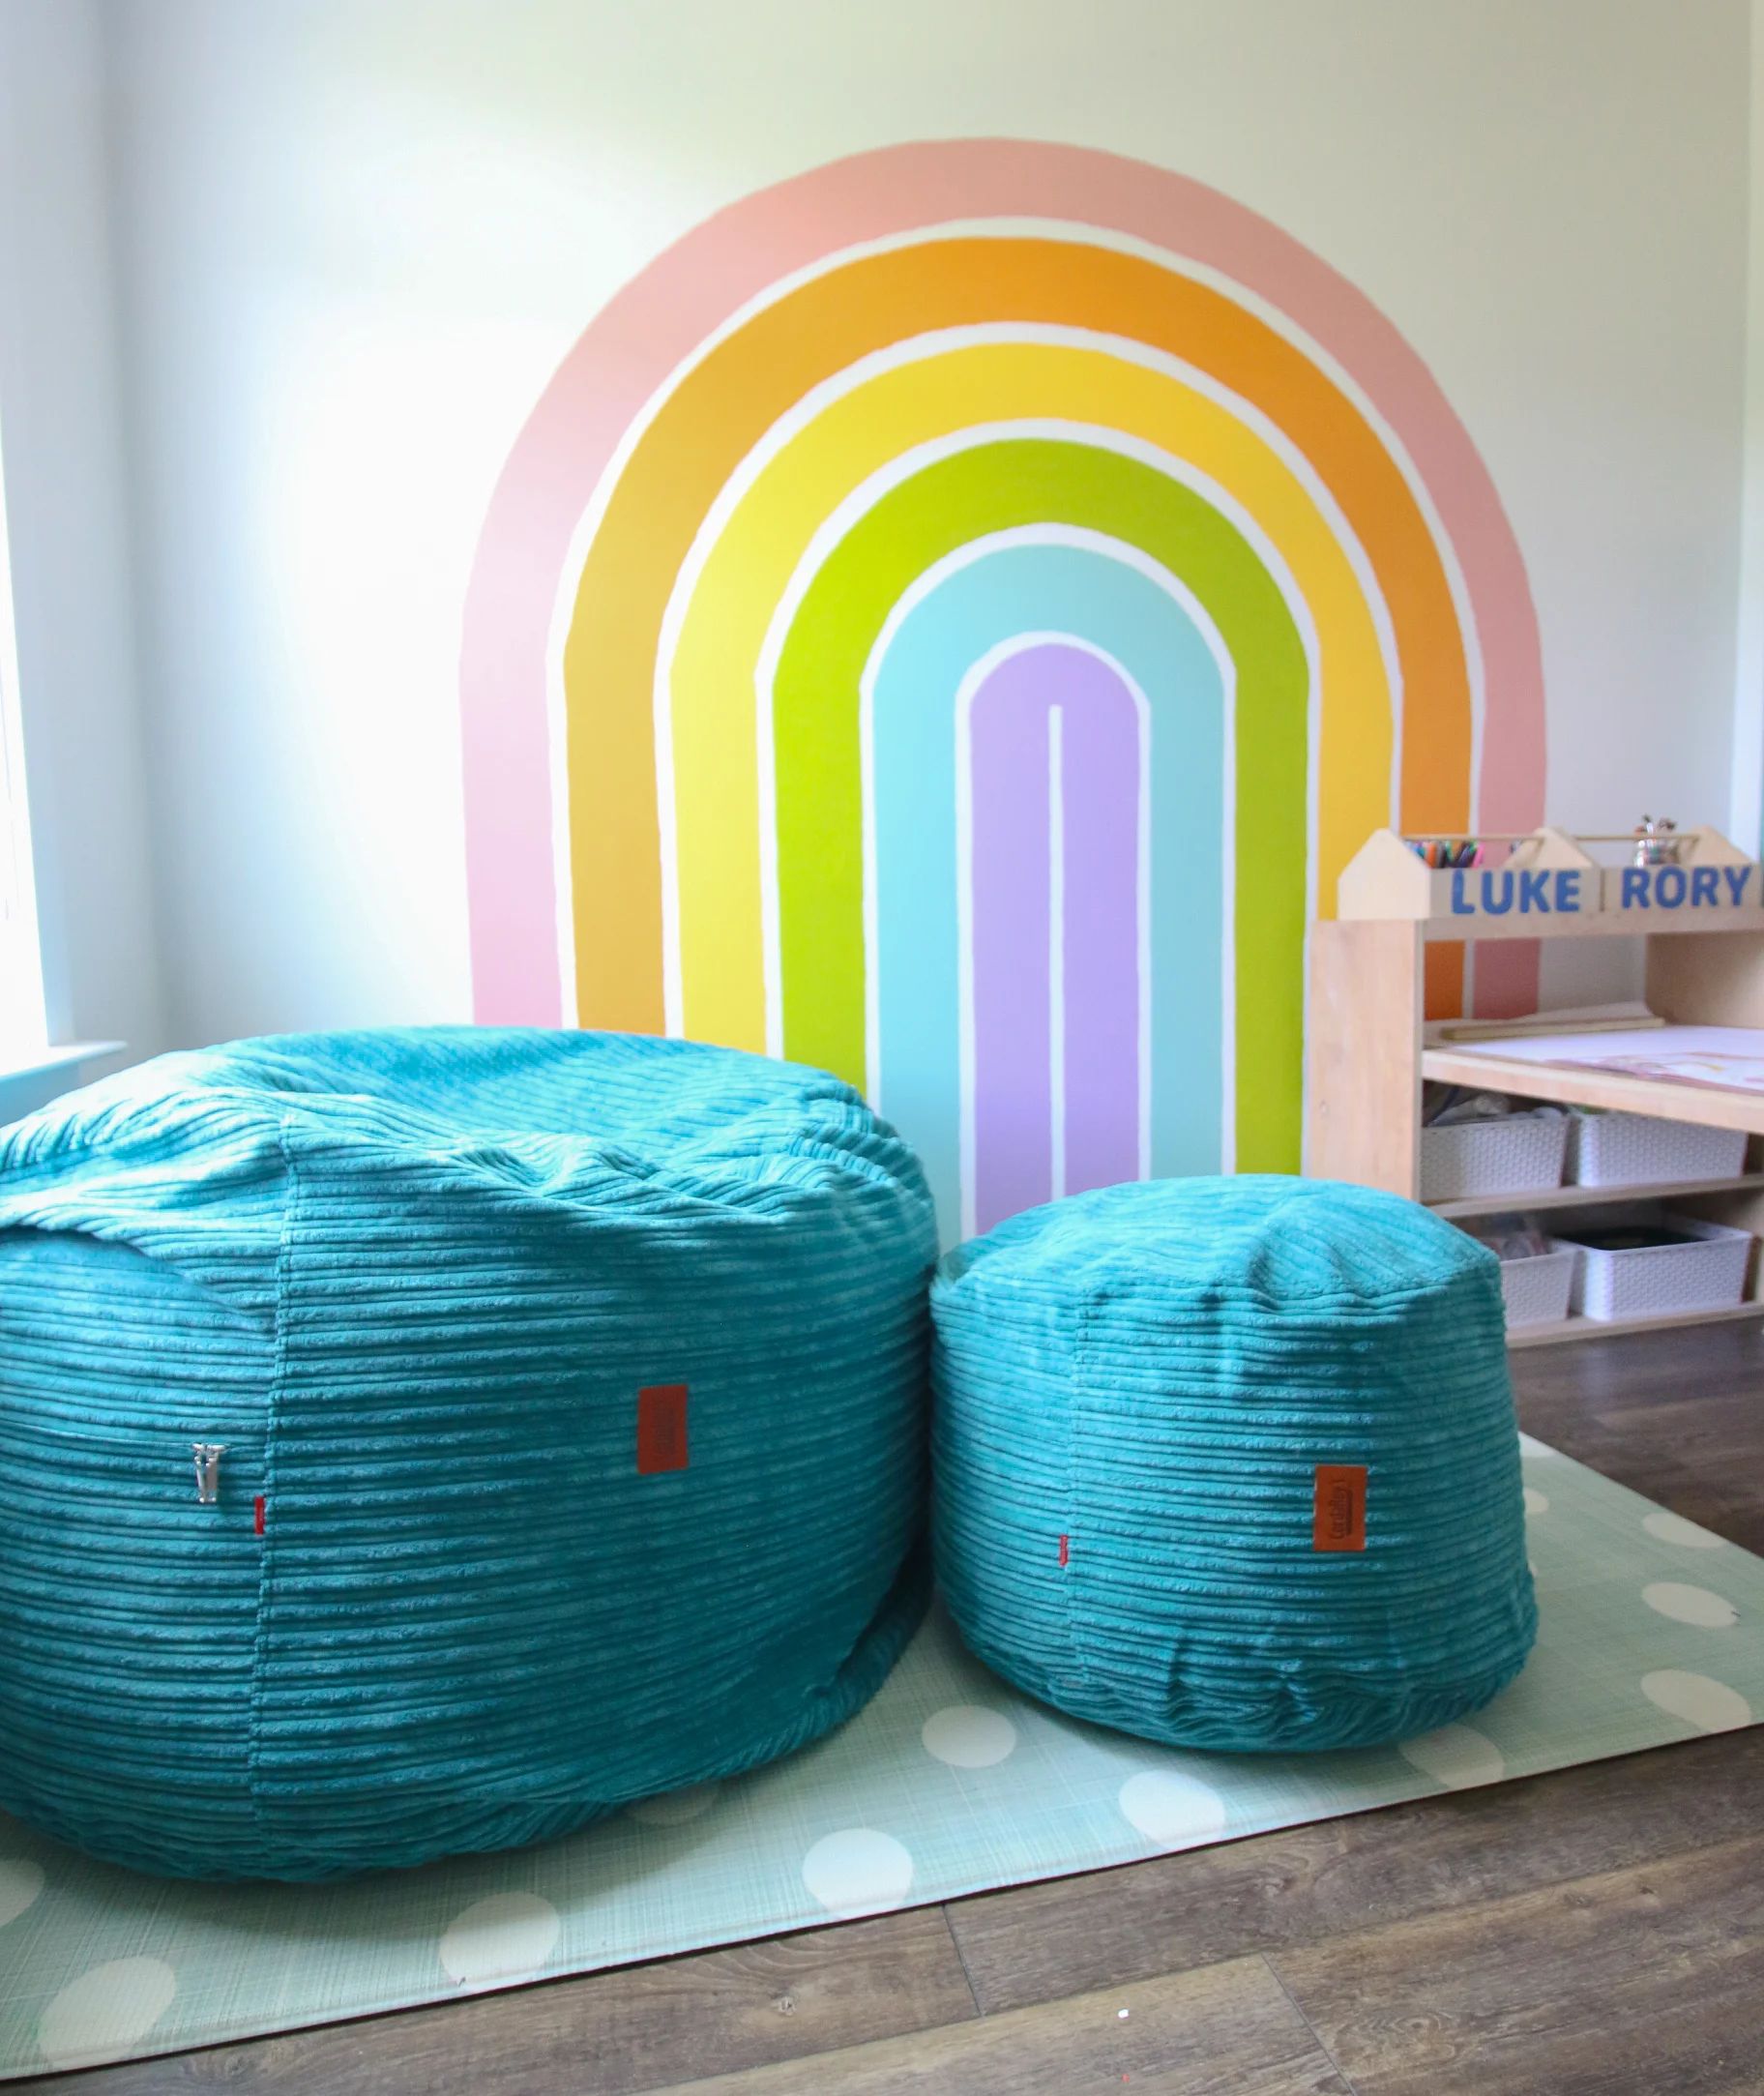 CordaRoy's Beanbag in front of a rainbow wall